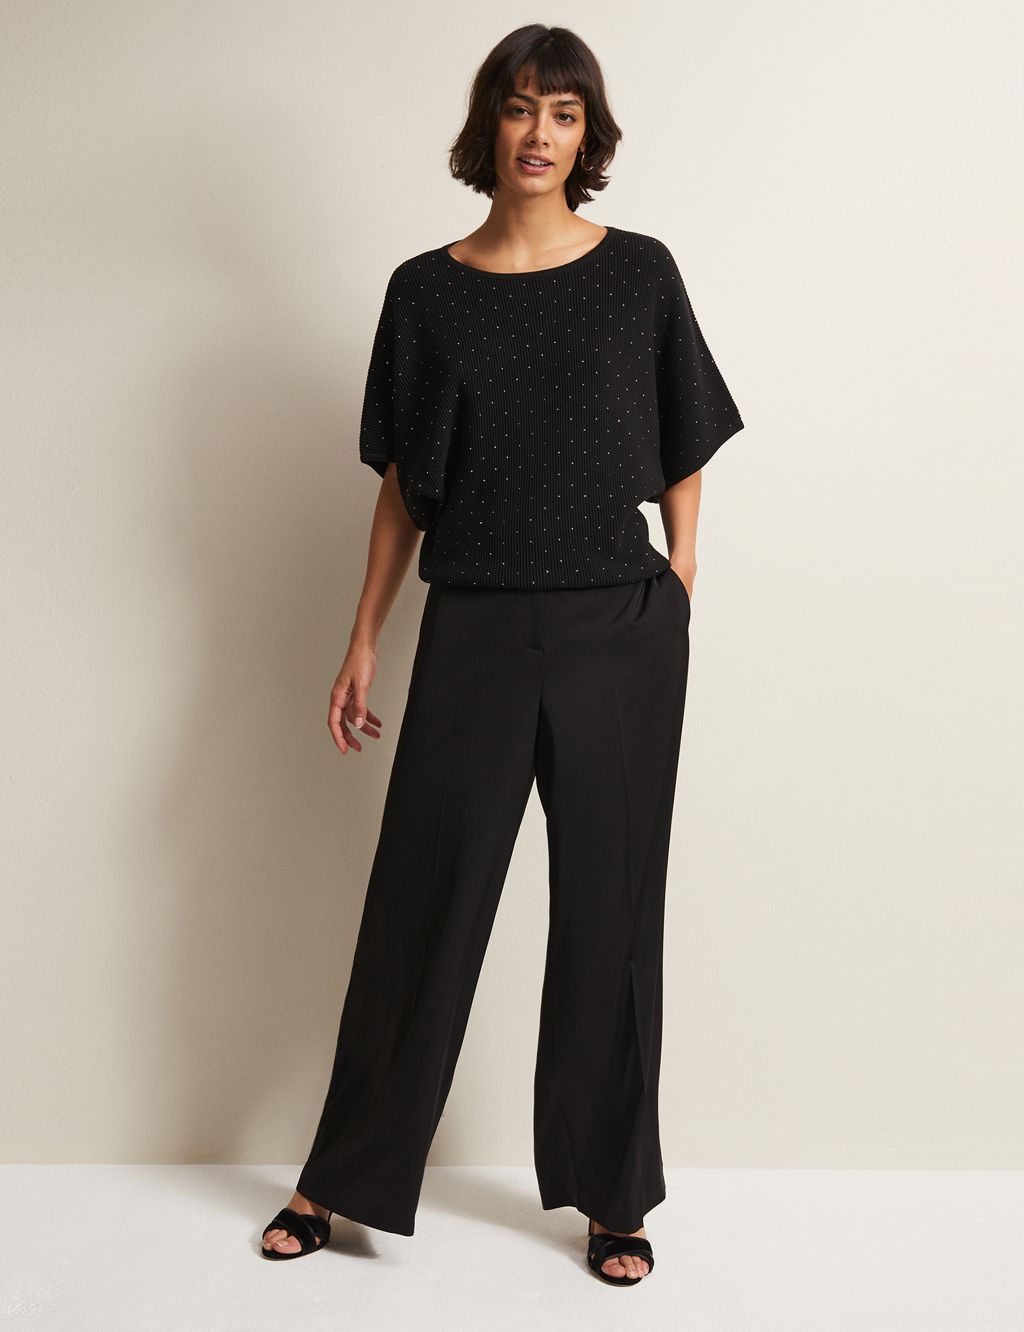 Cotton Rich Ribbed Embellished Jumper | Phase Eight | M&S